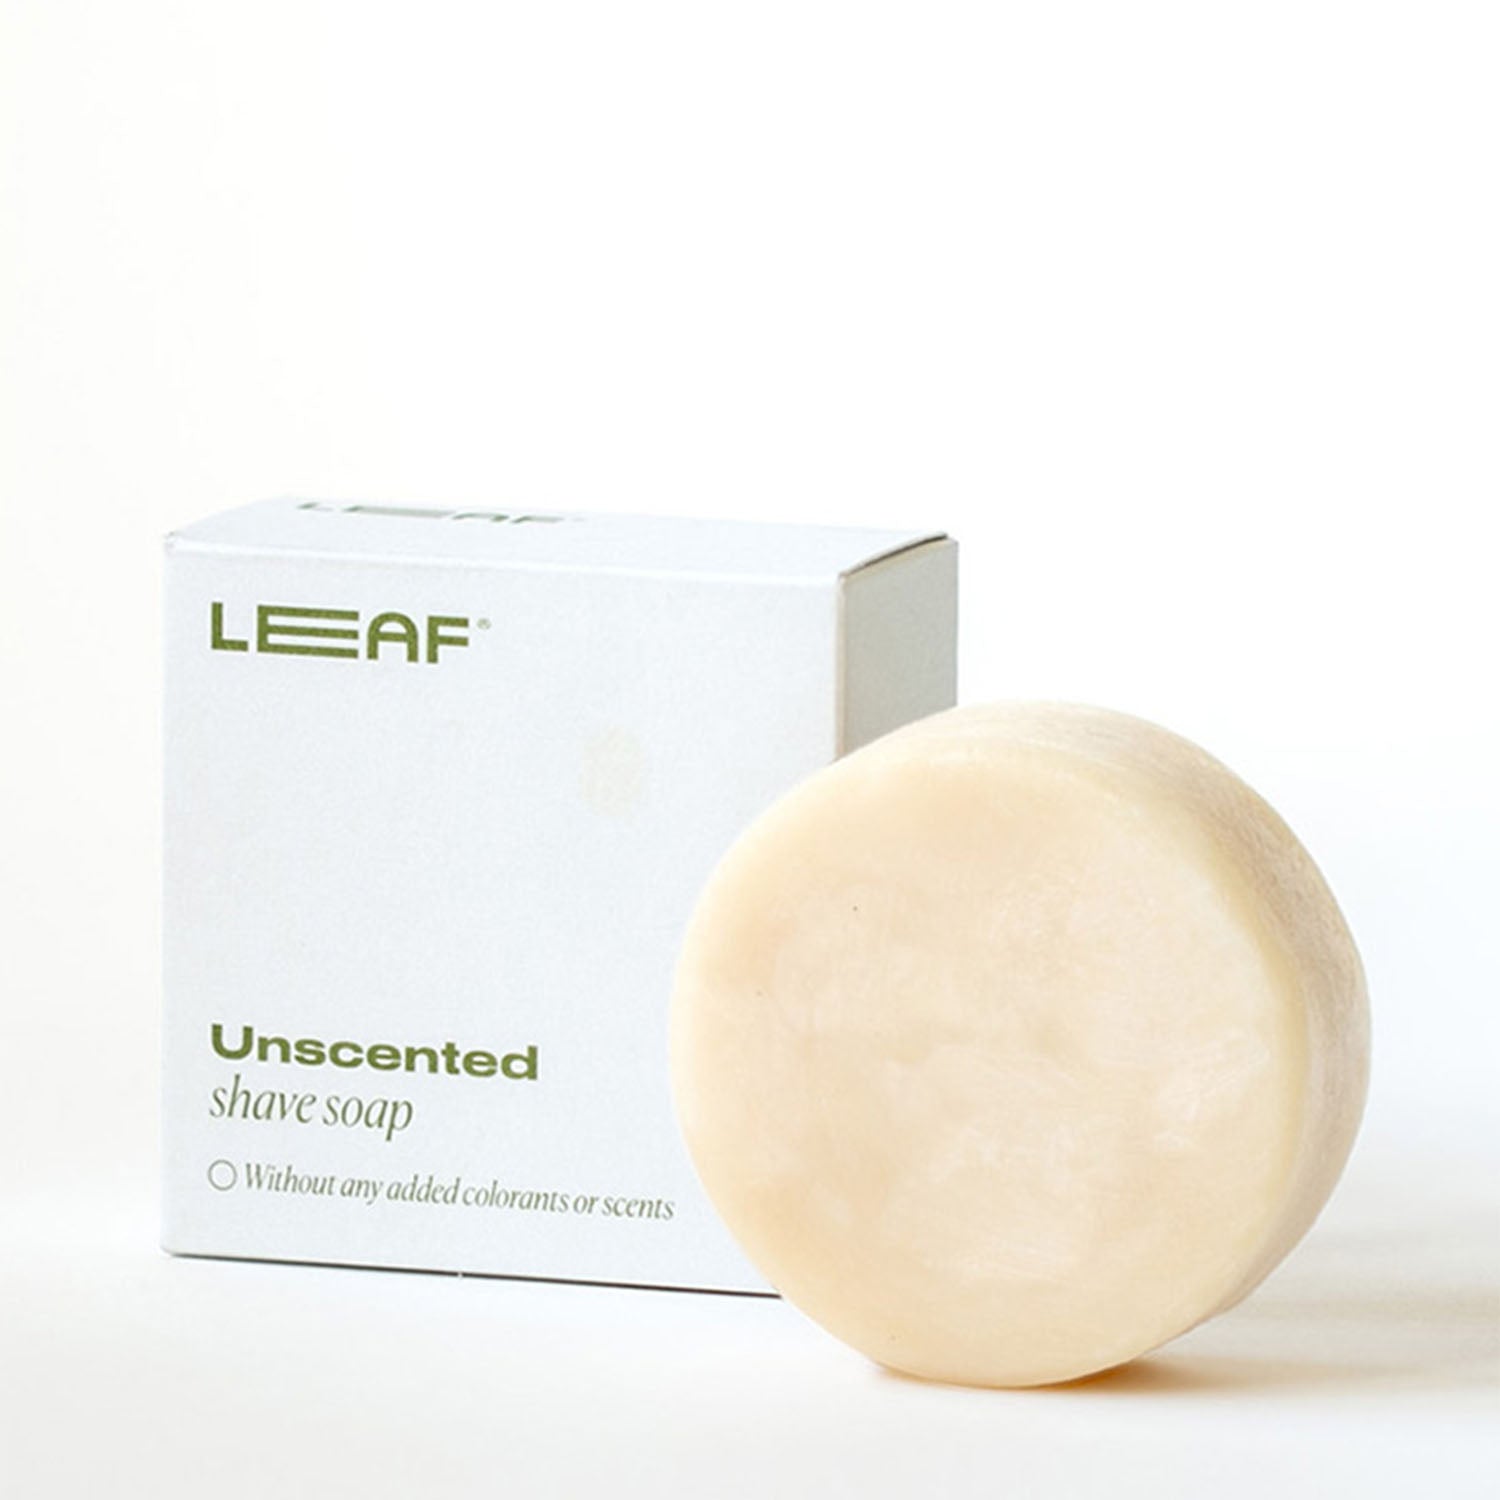 A round bar of shave soap sitting in front of it's Leaf Shave packaging box